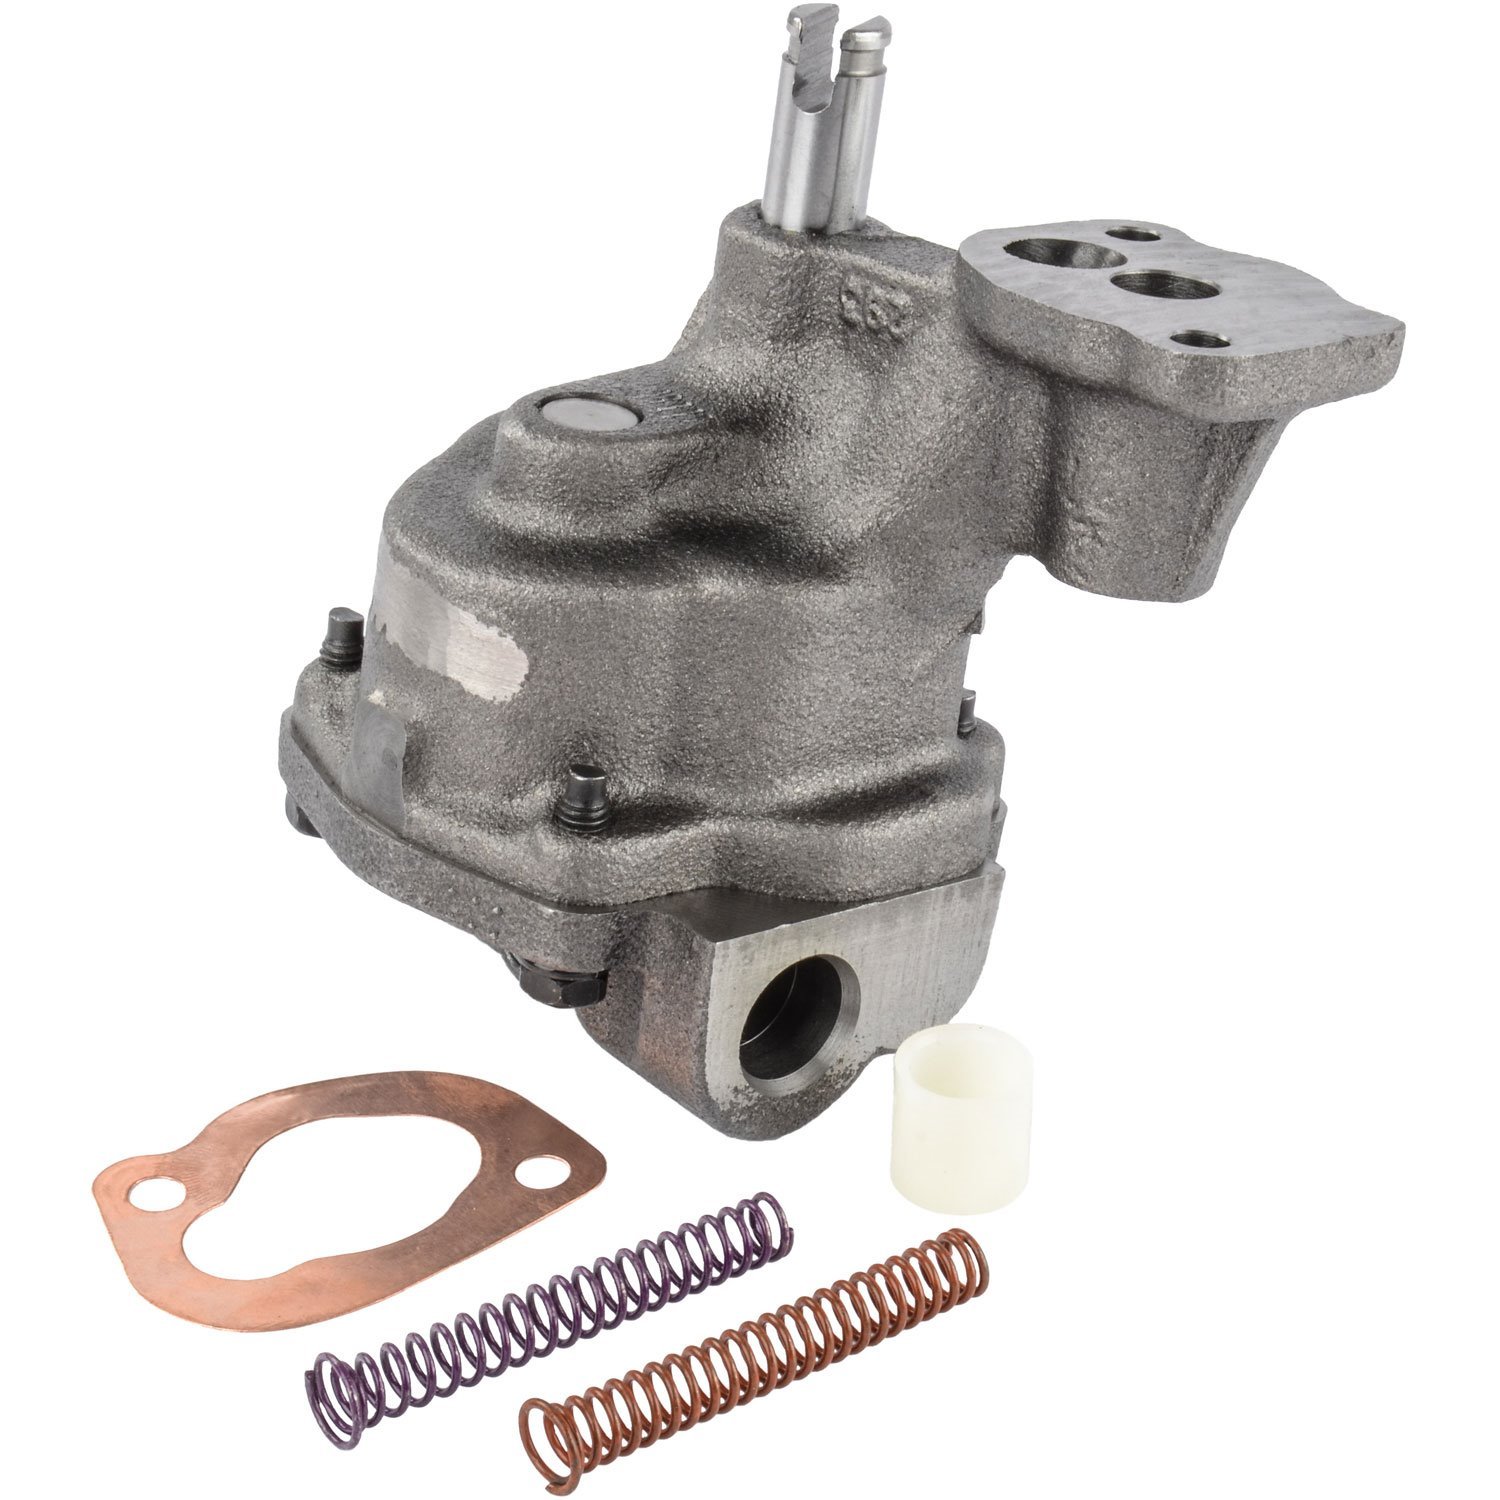 Oil Pump Adjustable for Street, Strip, Race Applications [Small Block Chevy]